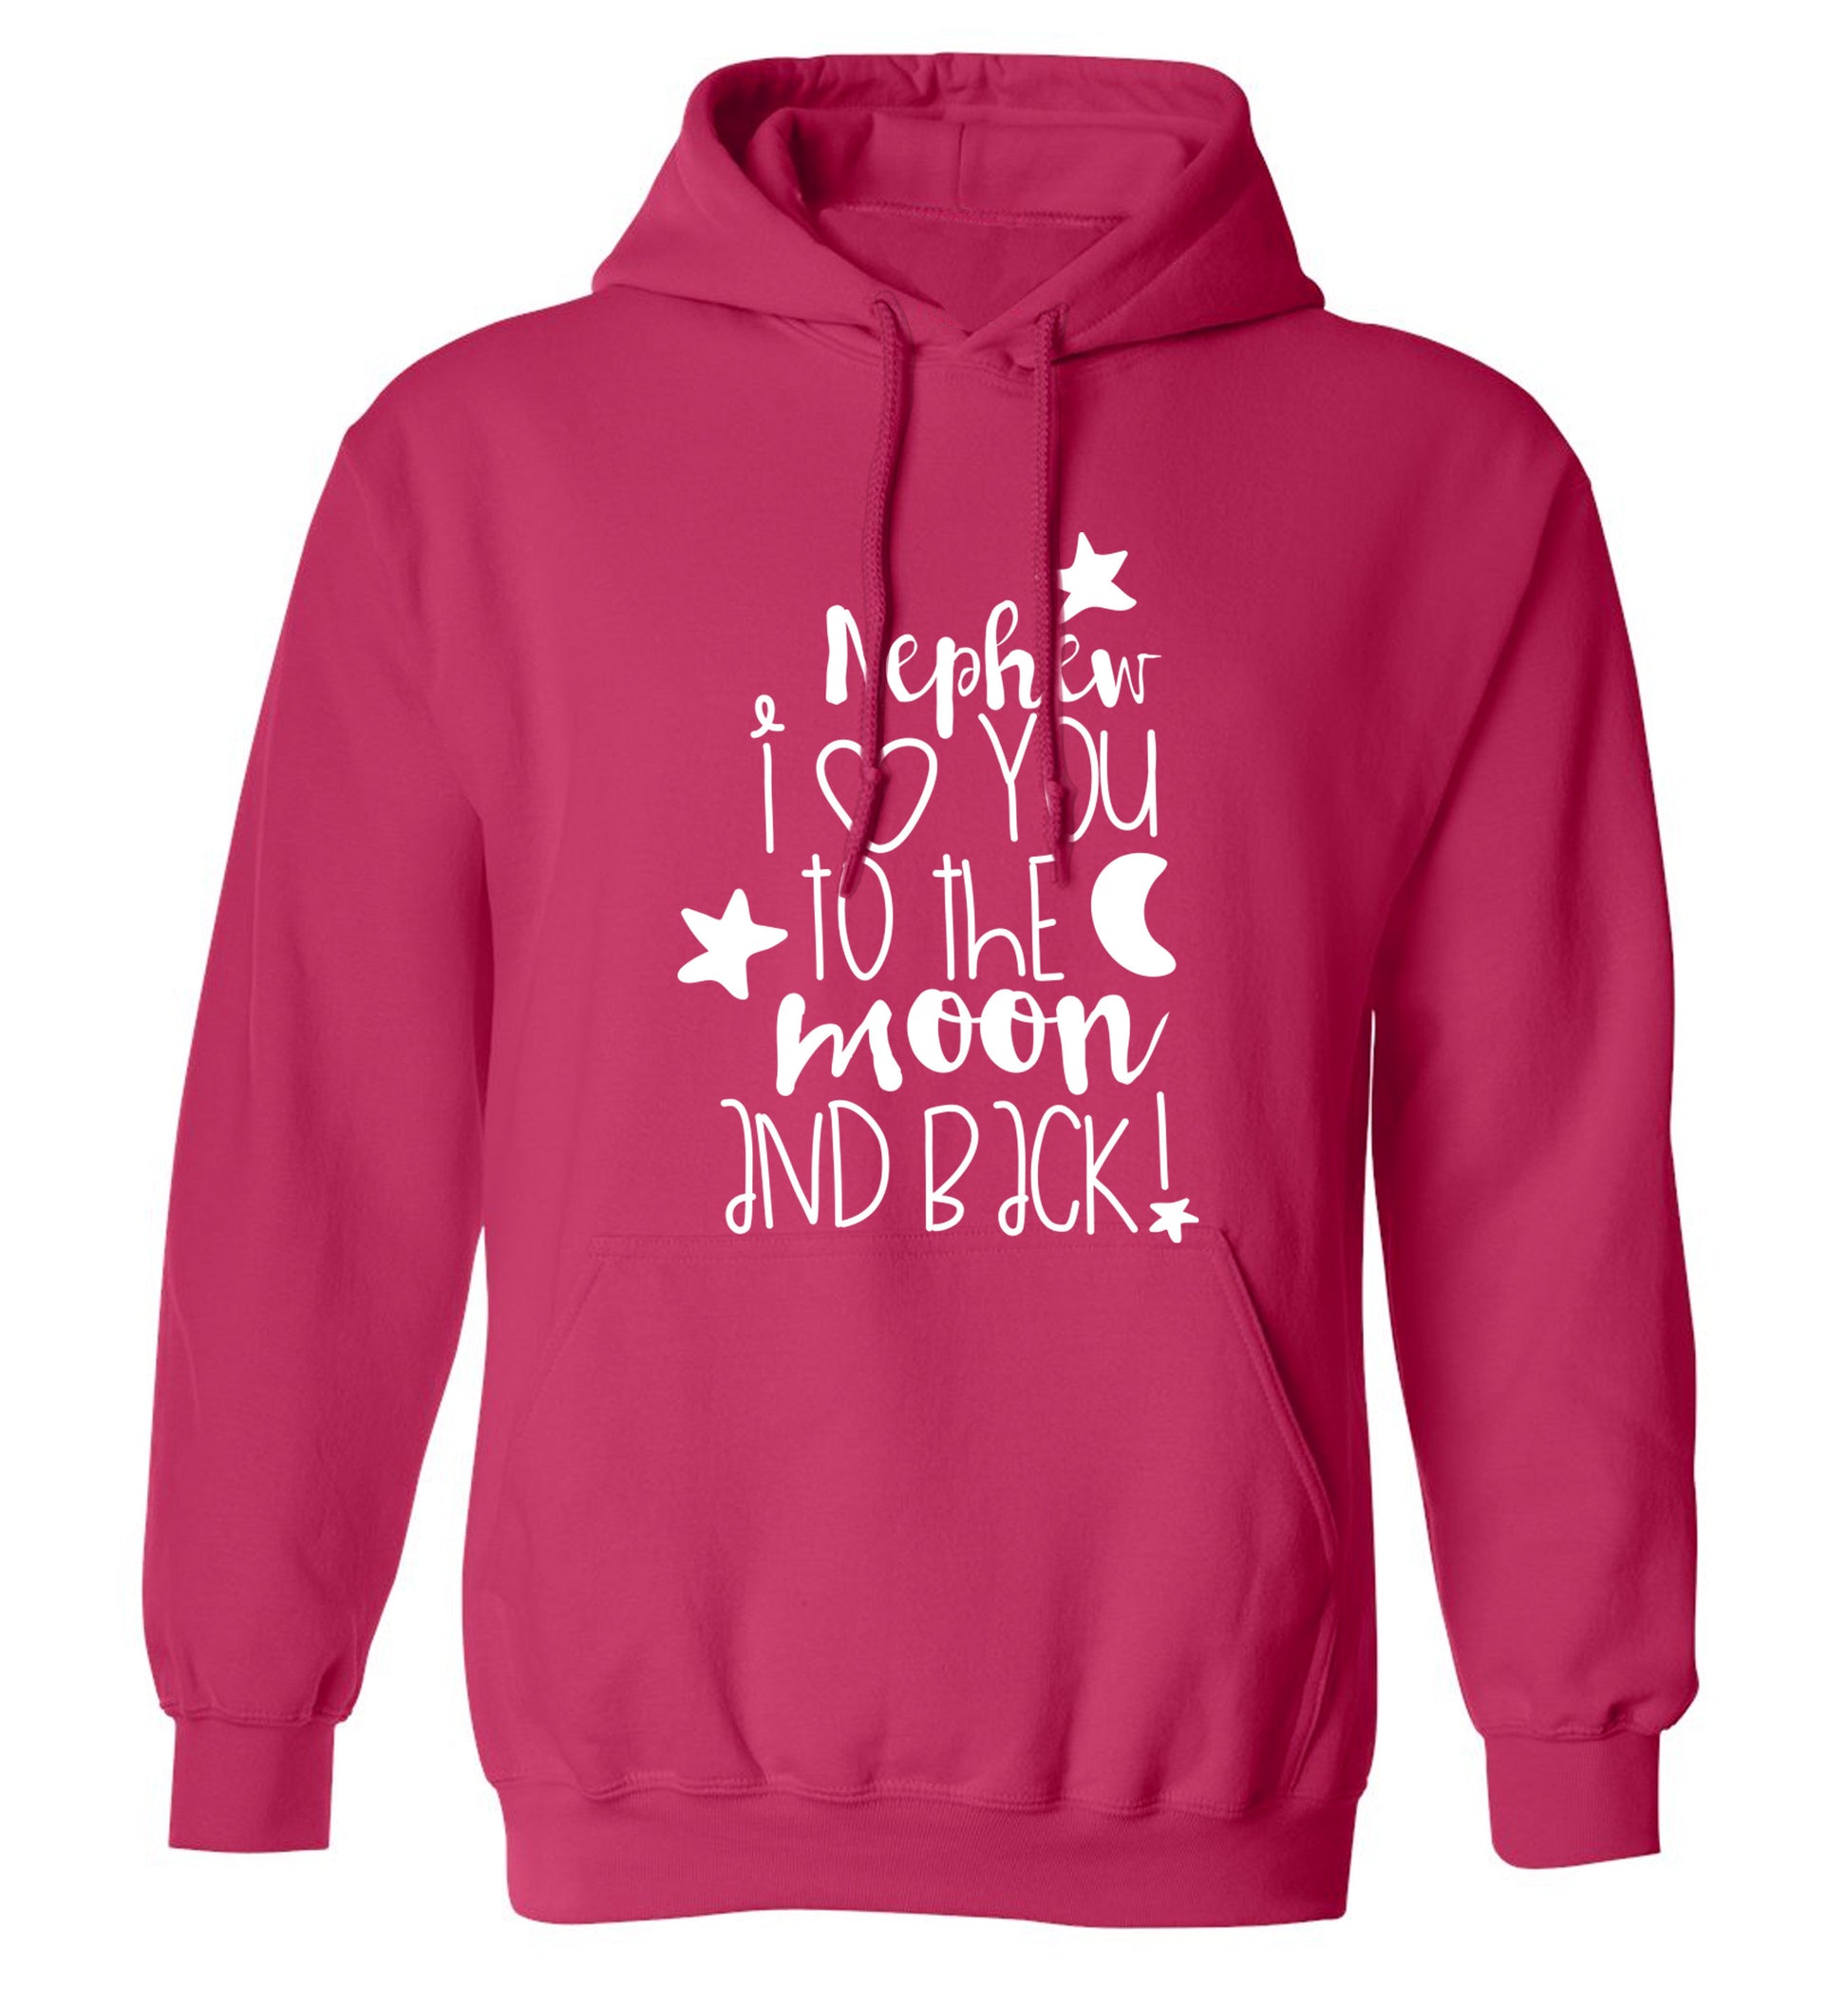 Nephew I love you to the moon and back adults unisex pink hoodie 2XL